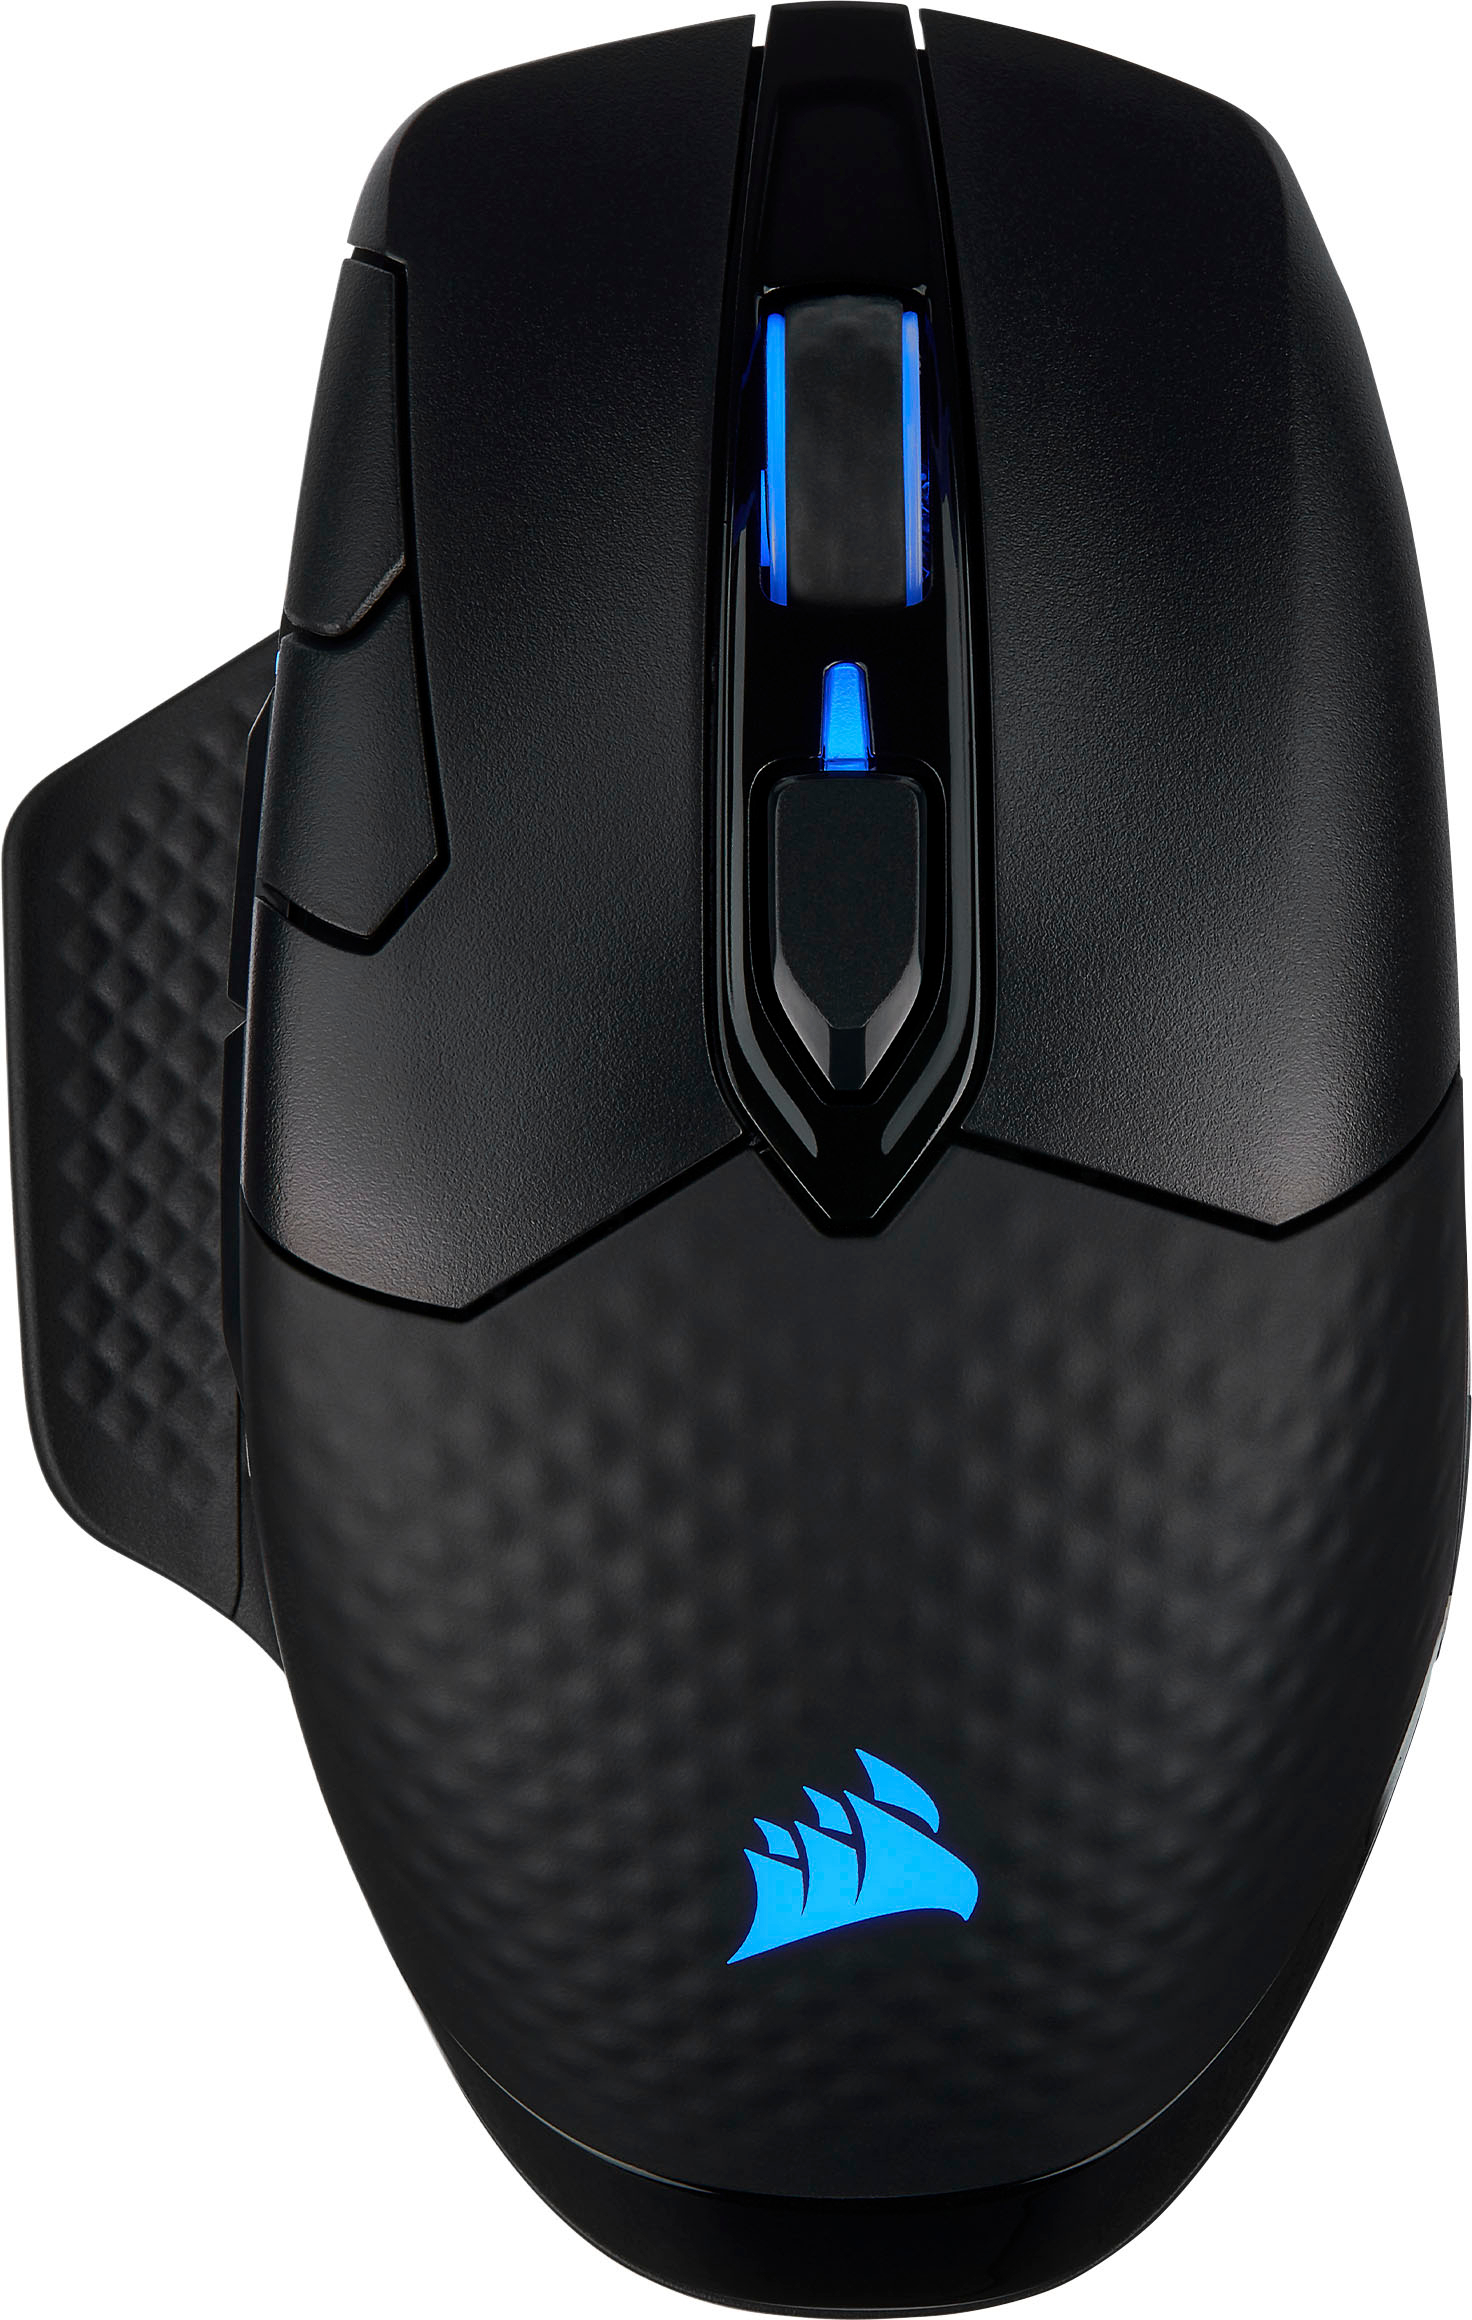 Back View: CORSAIR - DARK CORE RGB PRO SE Wireless Optical Gaming Mouse with Qi Wireless Charging - Black